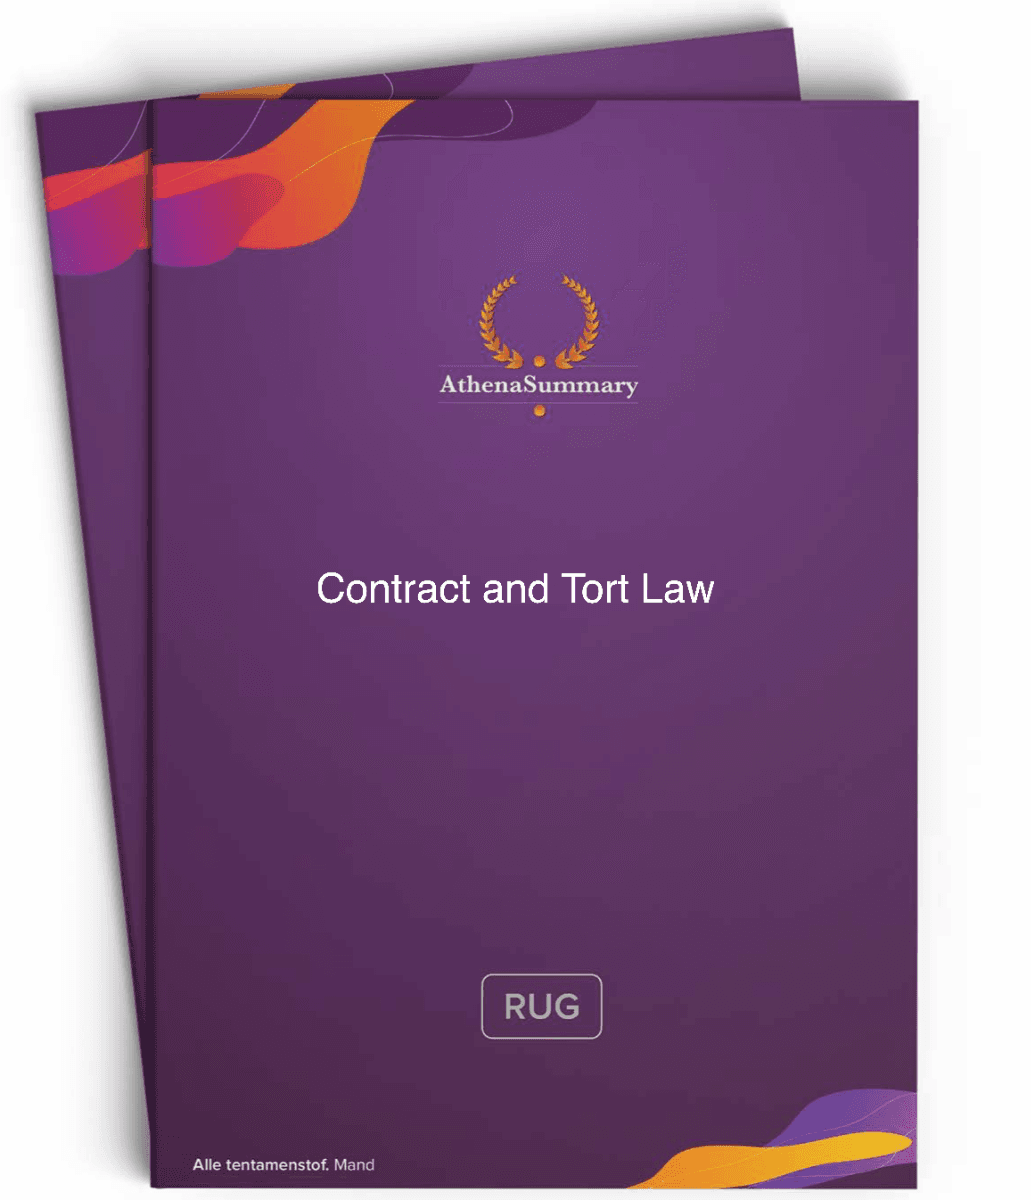 Literature Summary: Contract and Tort Law